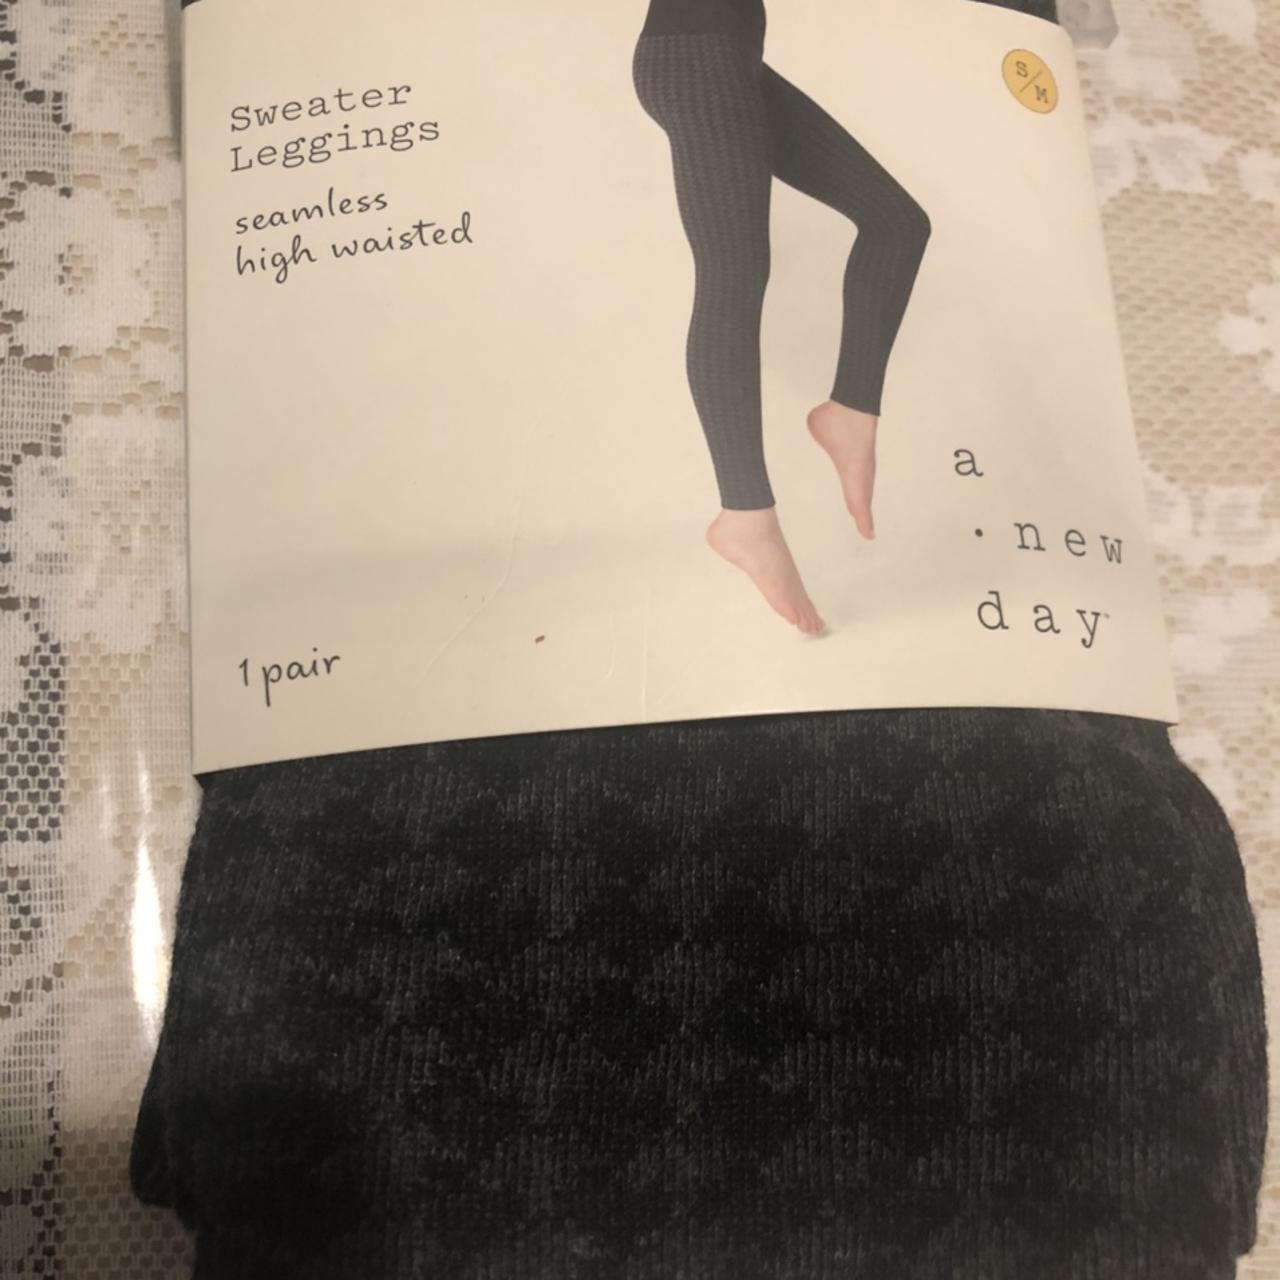 A New Day Sweater Leggings, Seamless high waisted